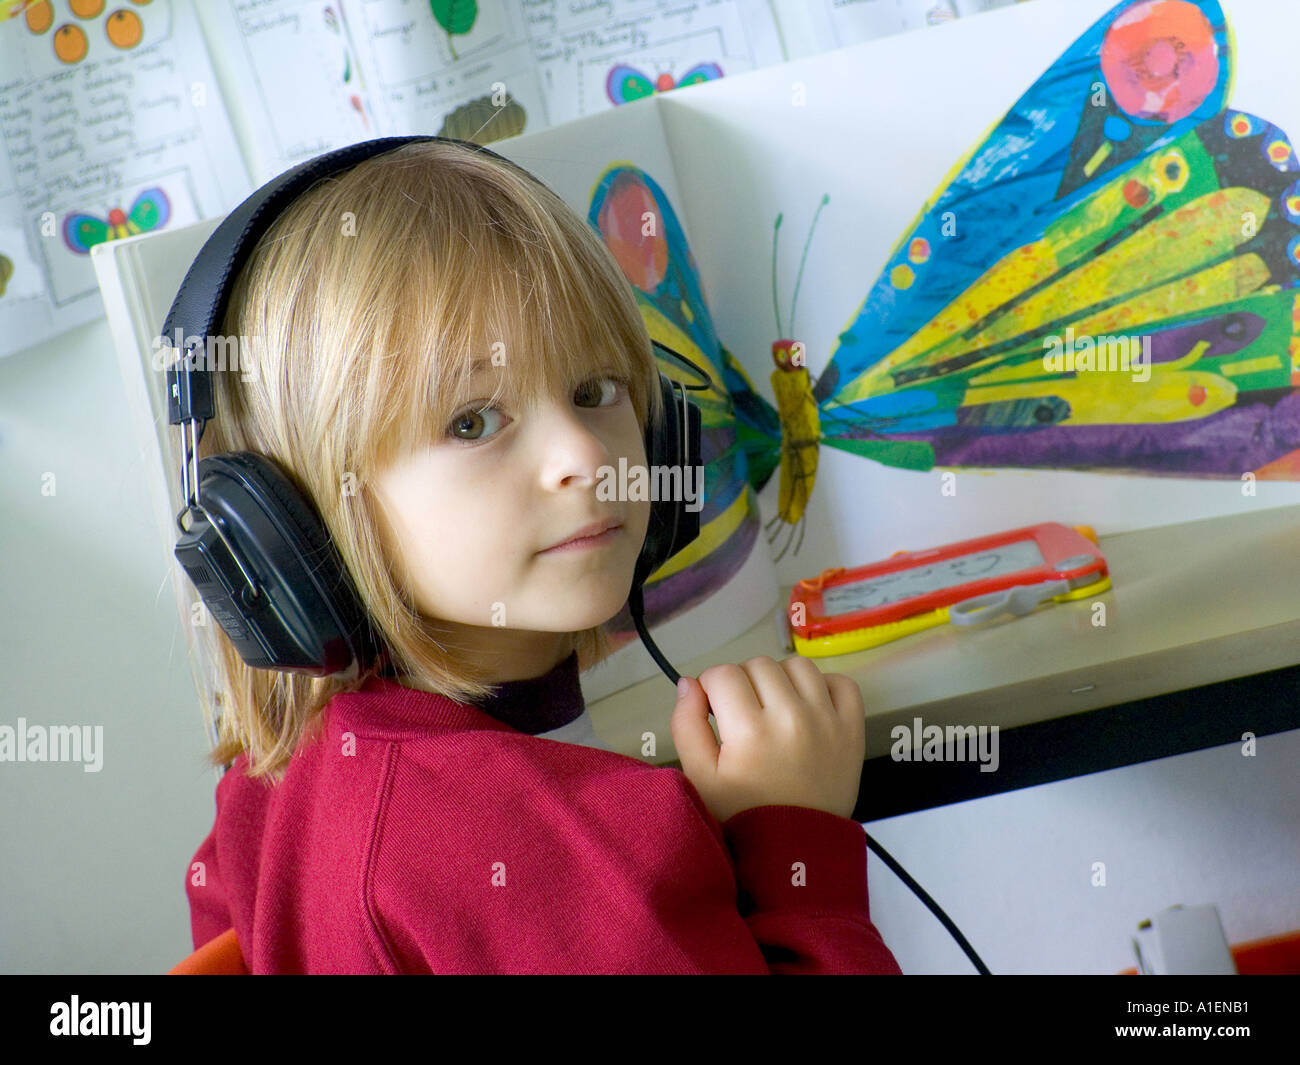 AUDIO EDUCATION Infant playschool child listens to an educational story through her headphones in school classroom Stock Photo